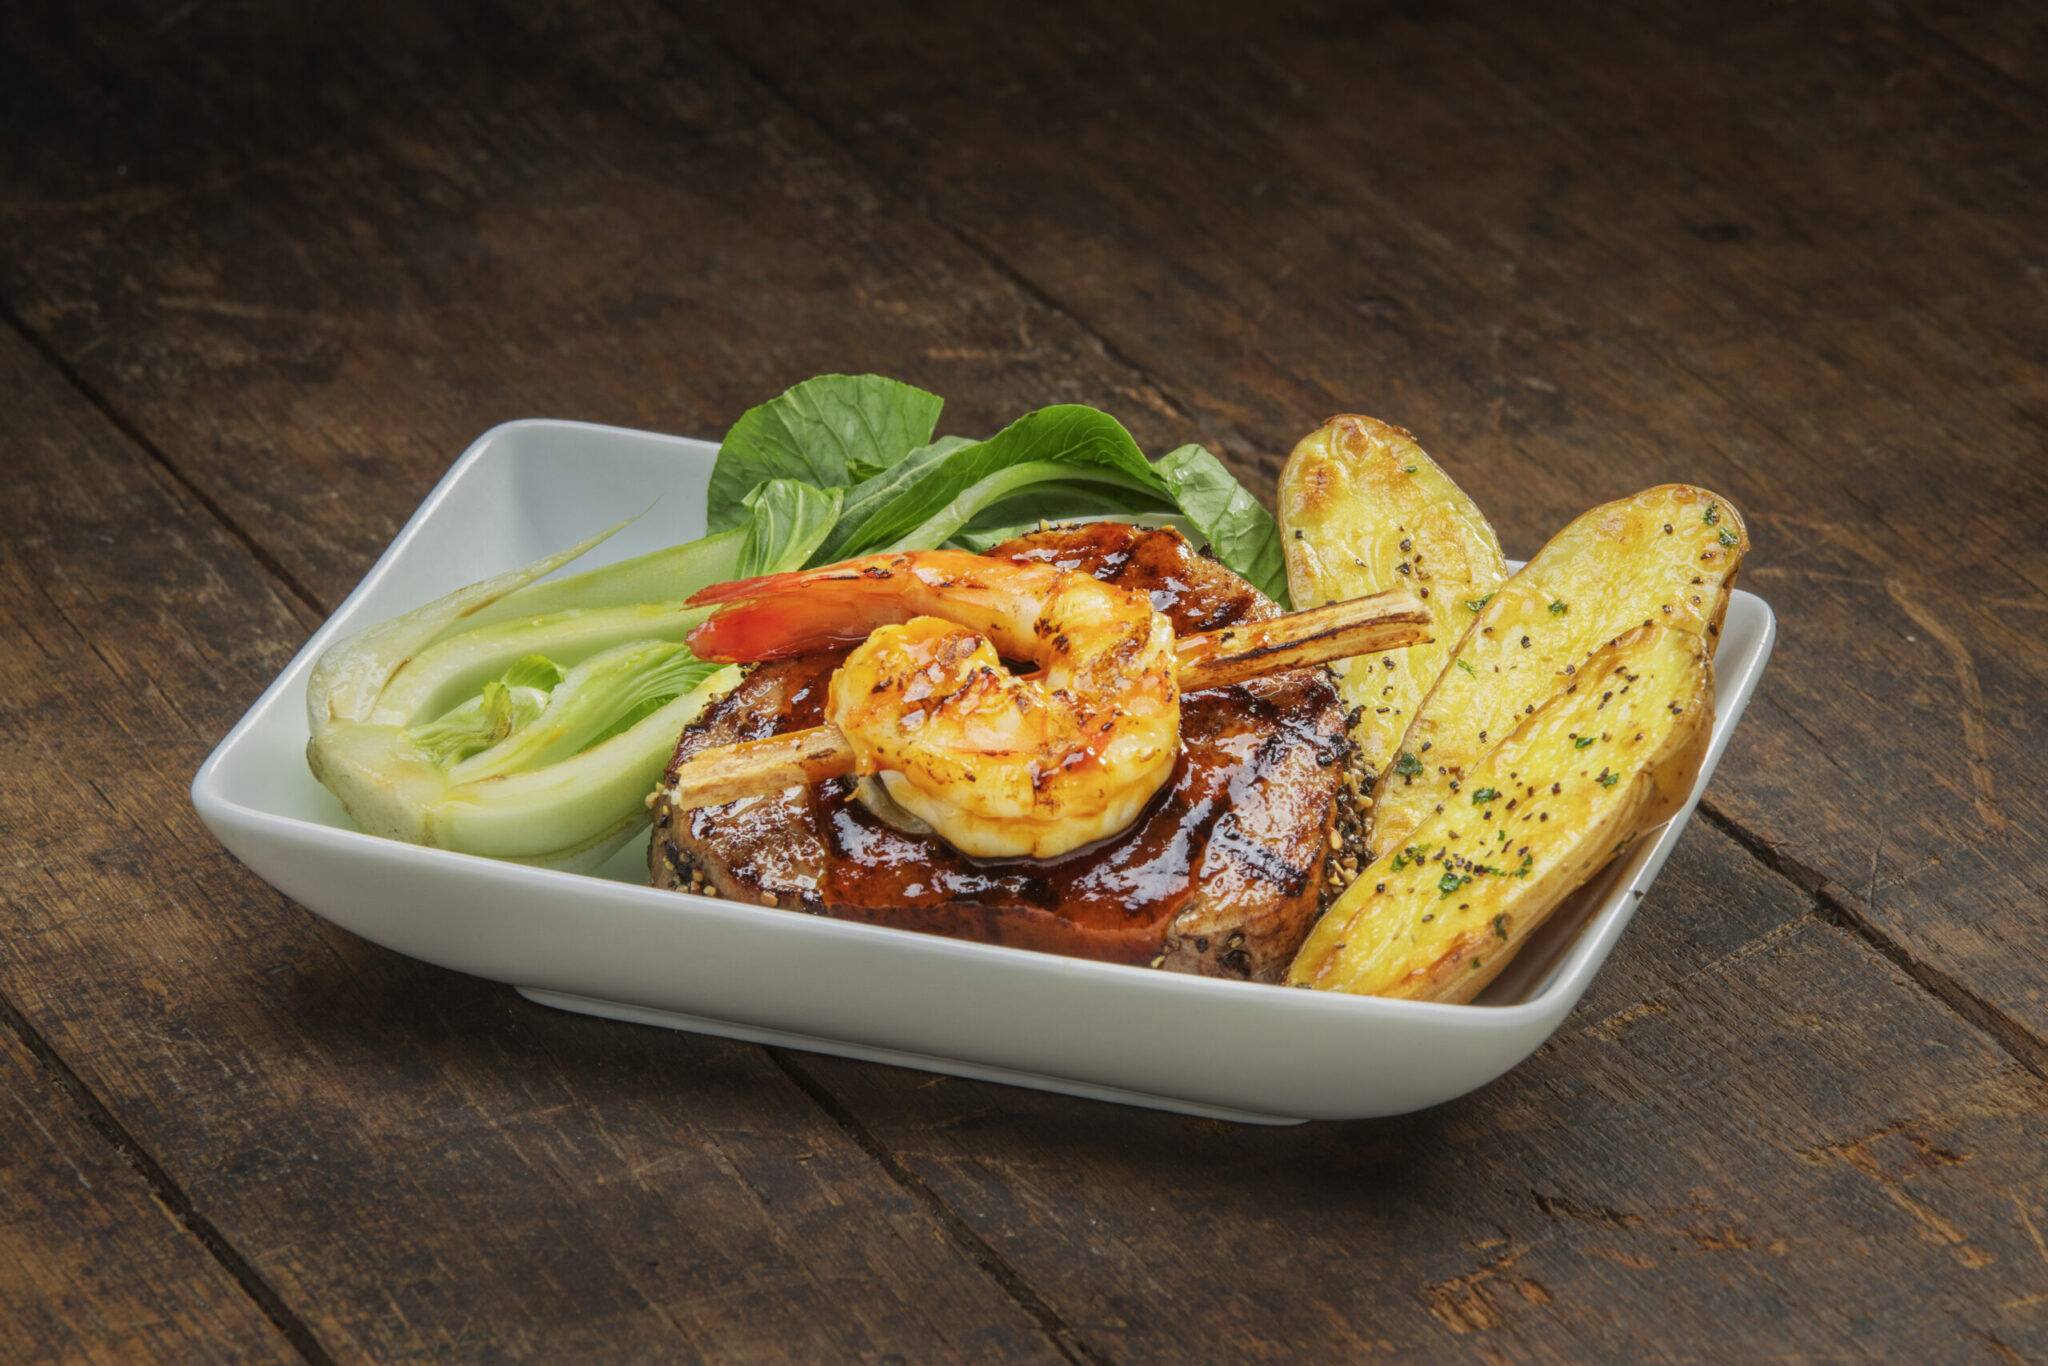 American Airlines Flagship Business Sam Choy's Short Haul Hawaii Surf and Turf